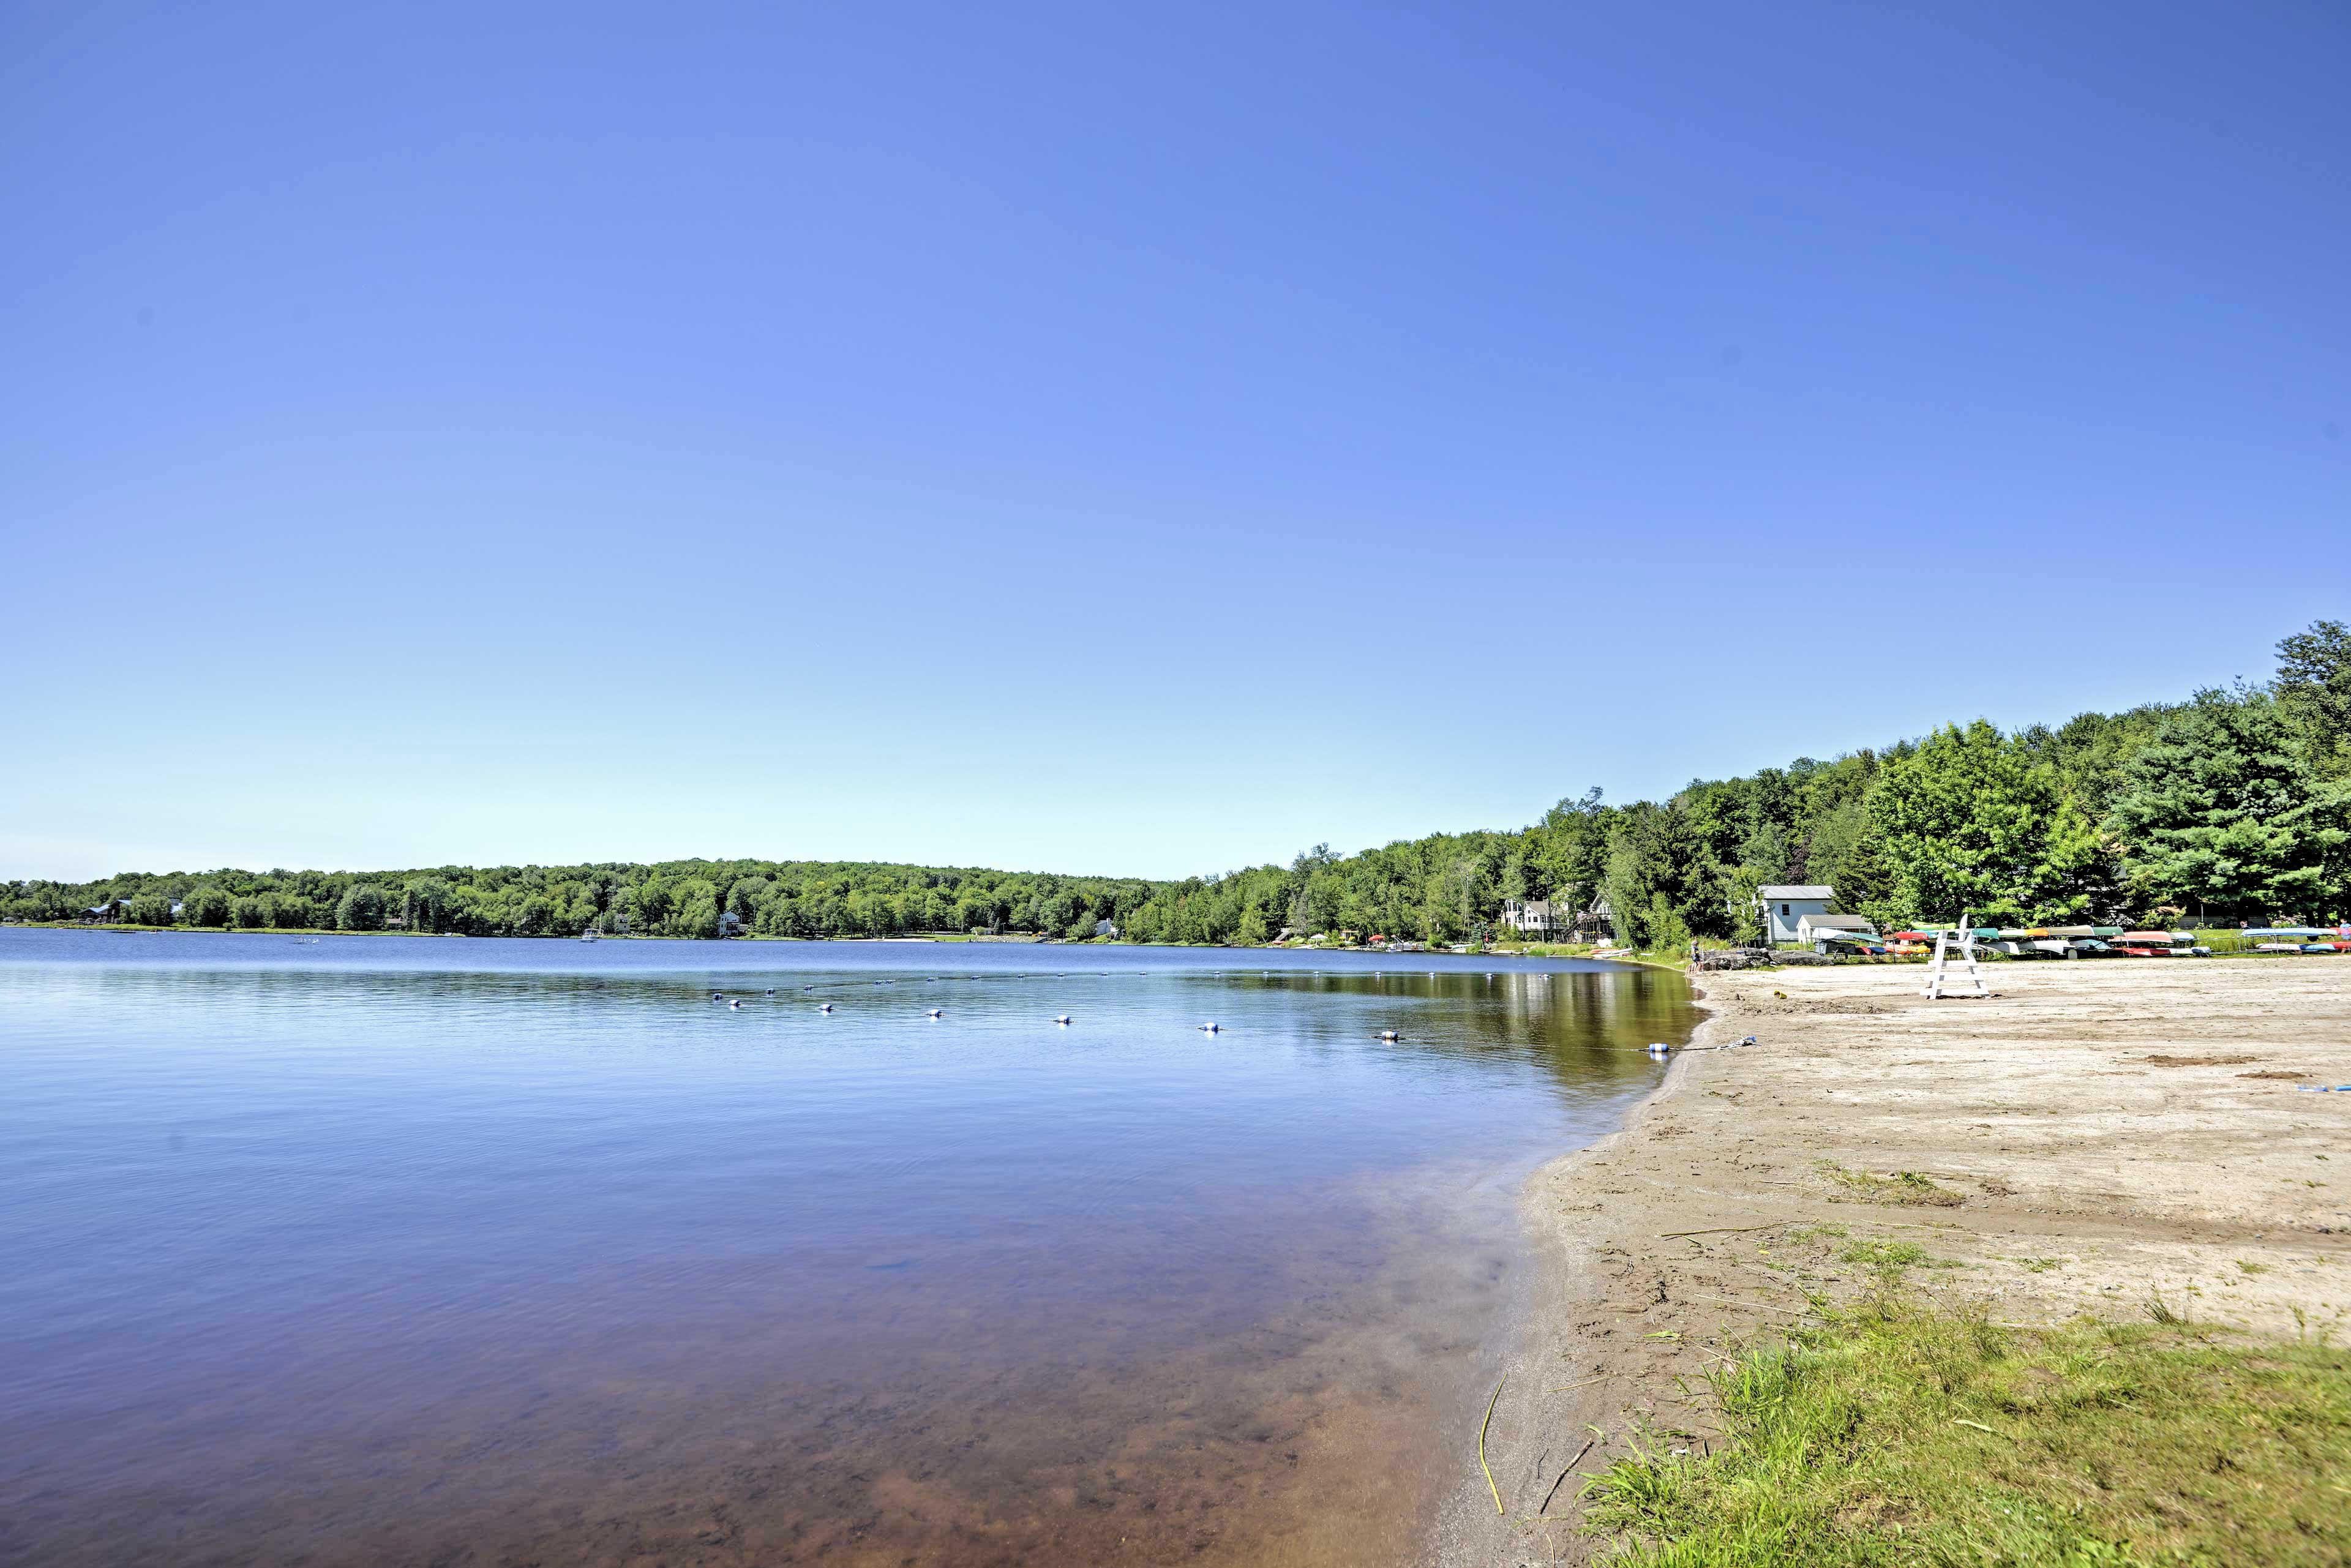 Sink your toes in the sand while gazing out at the stunning lake.